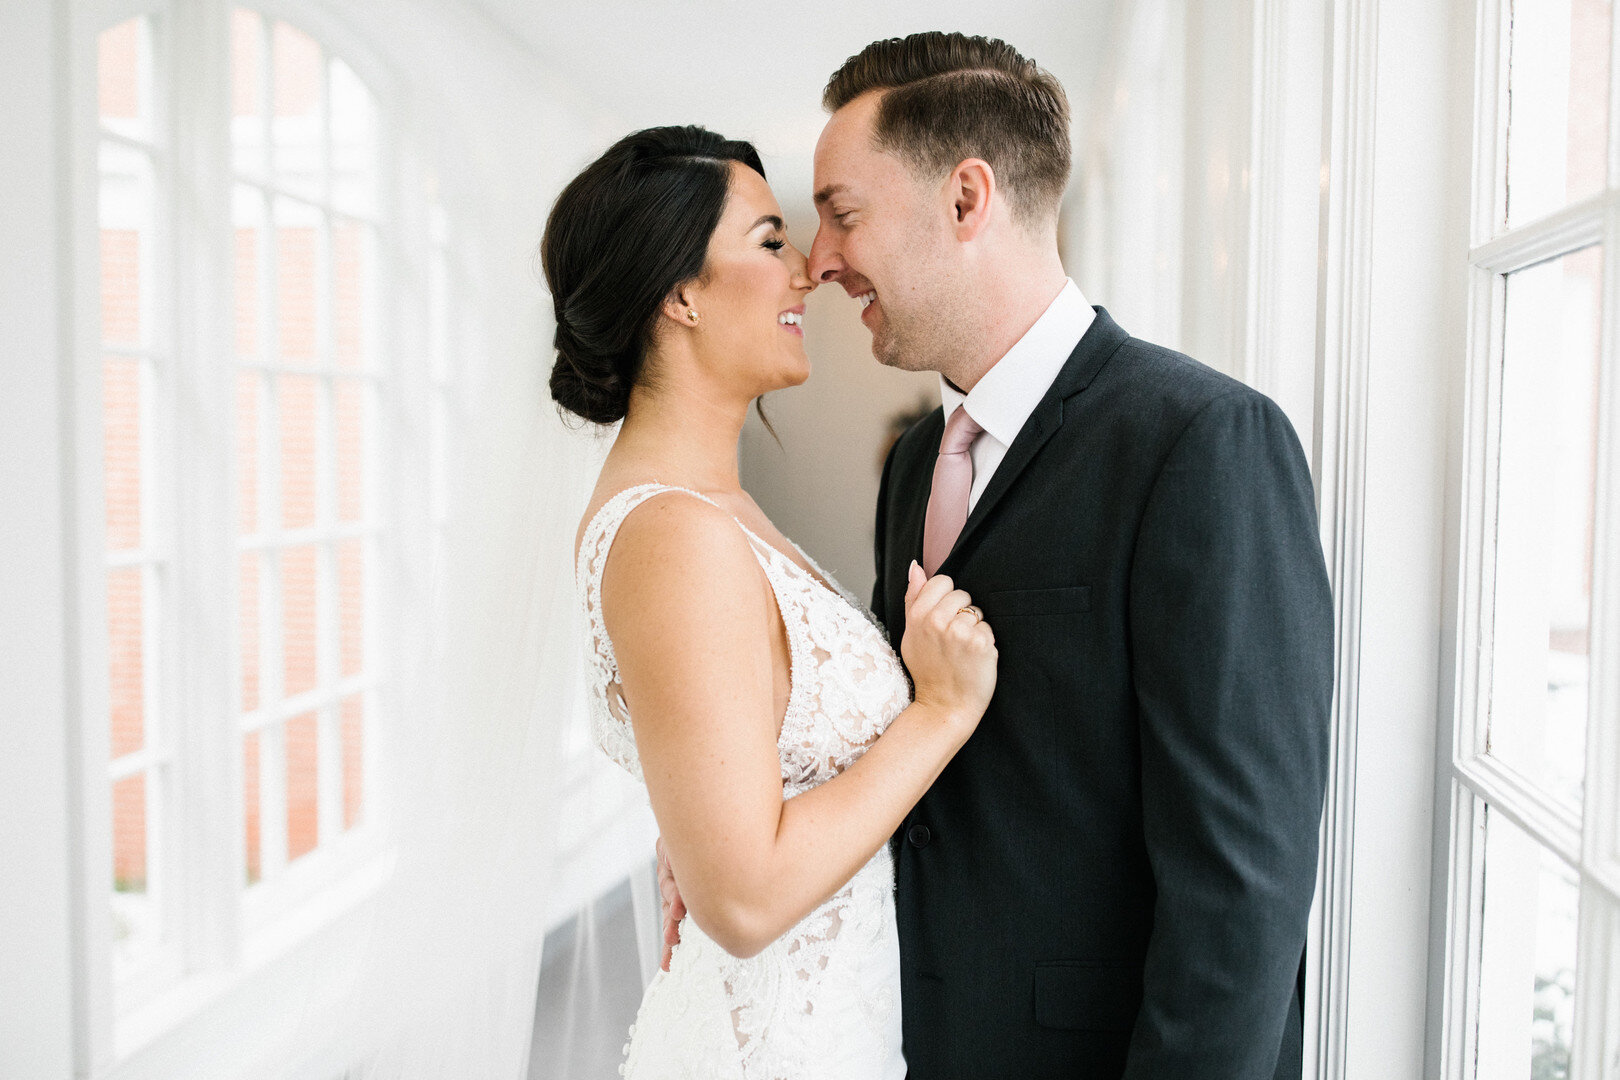 Wedding first look: Chicago spring wedding captured by Hannah Rose Gray Photography. See more timeless wedding ideas on CHItheeWED.com!